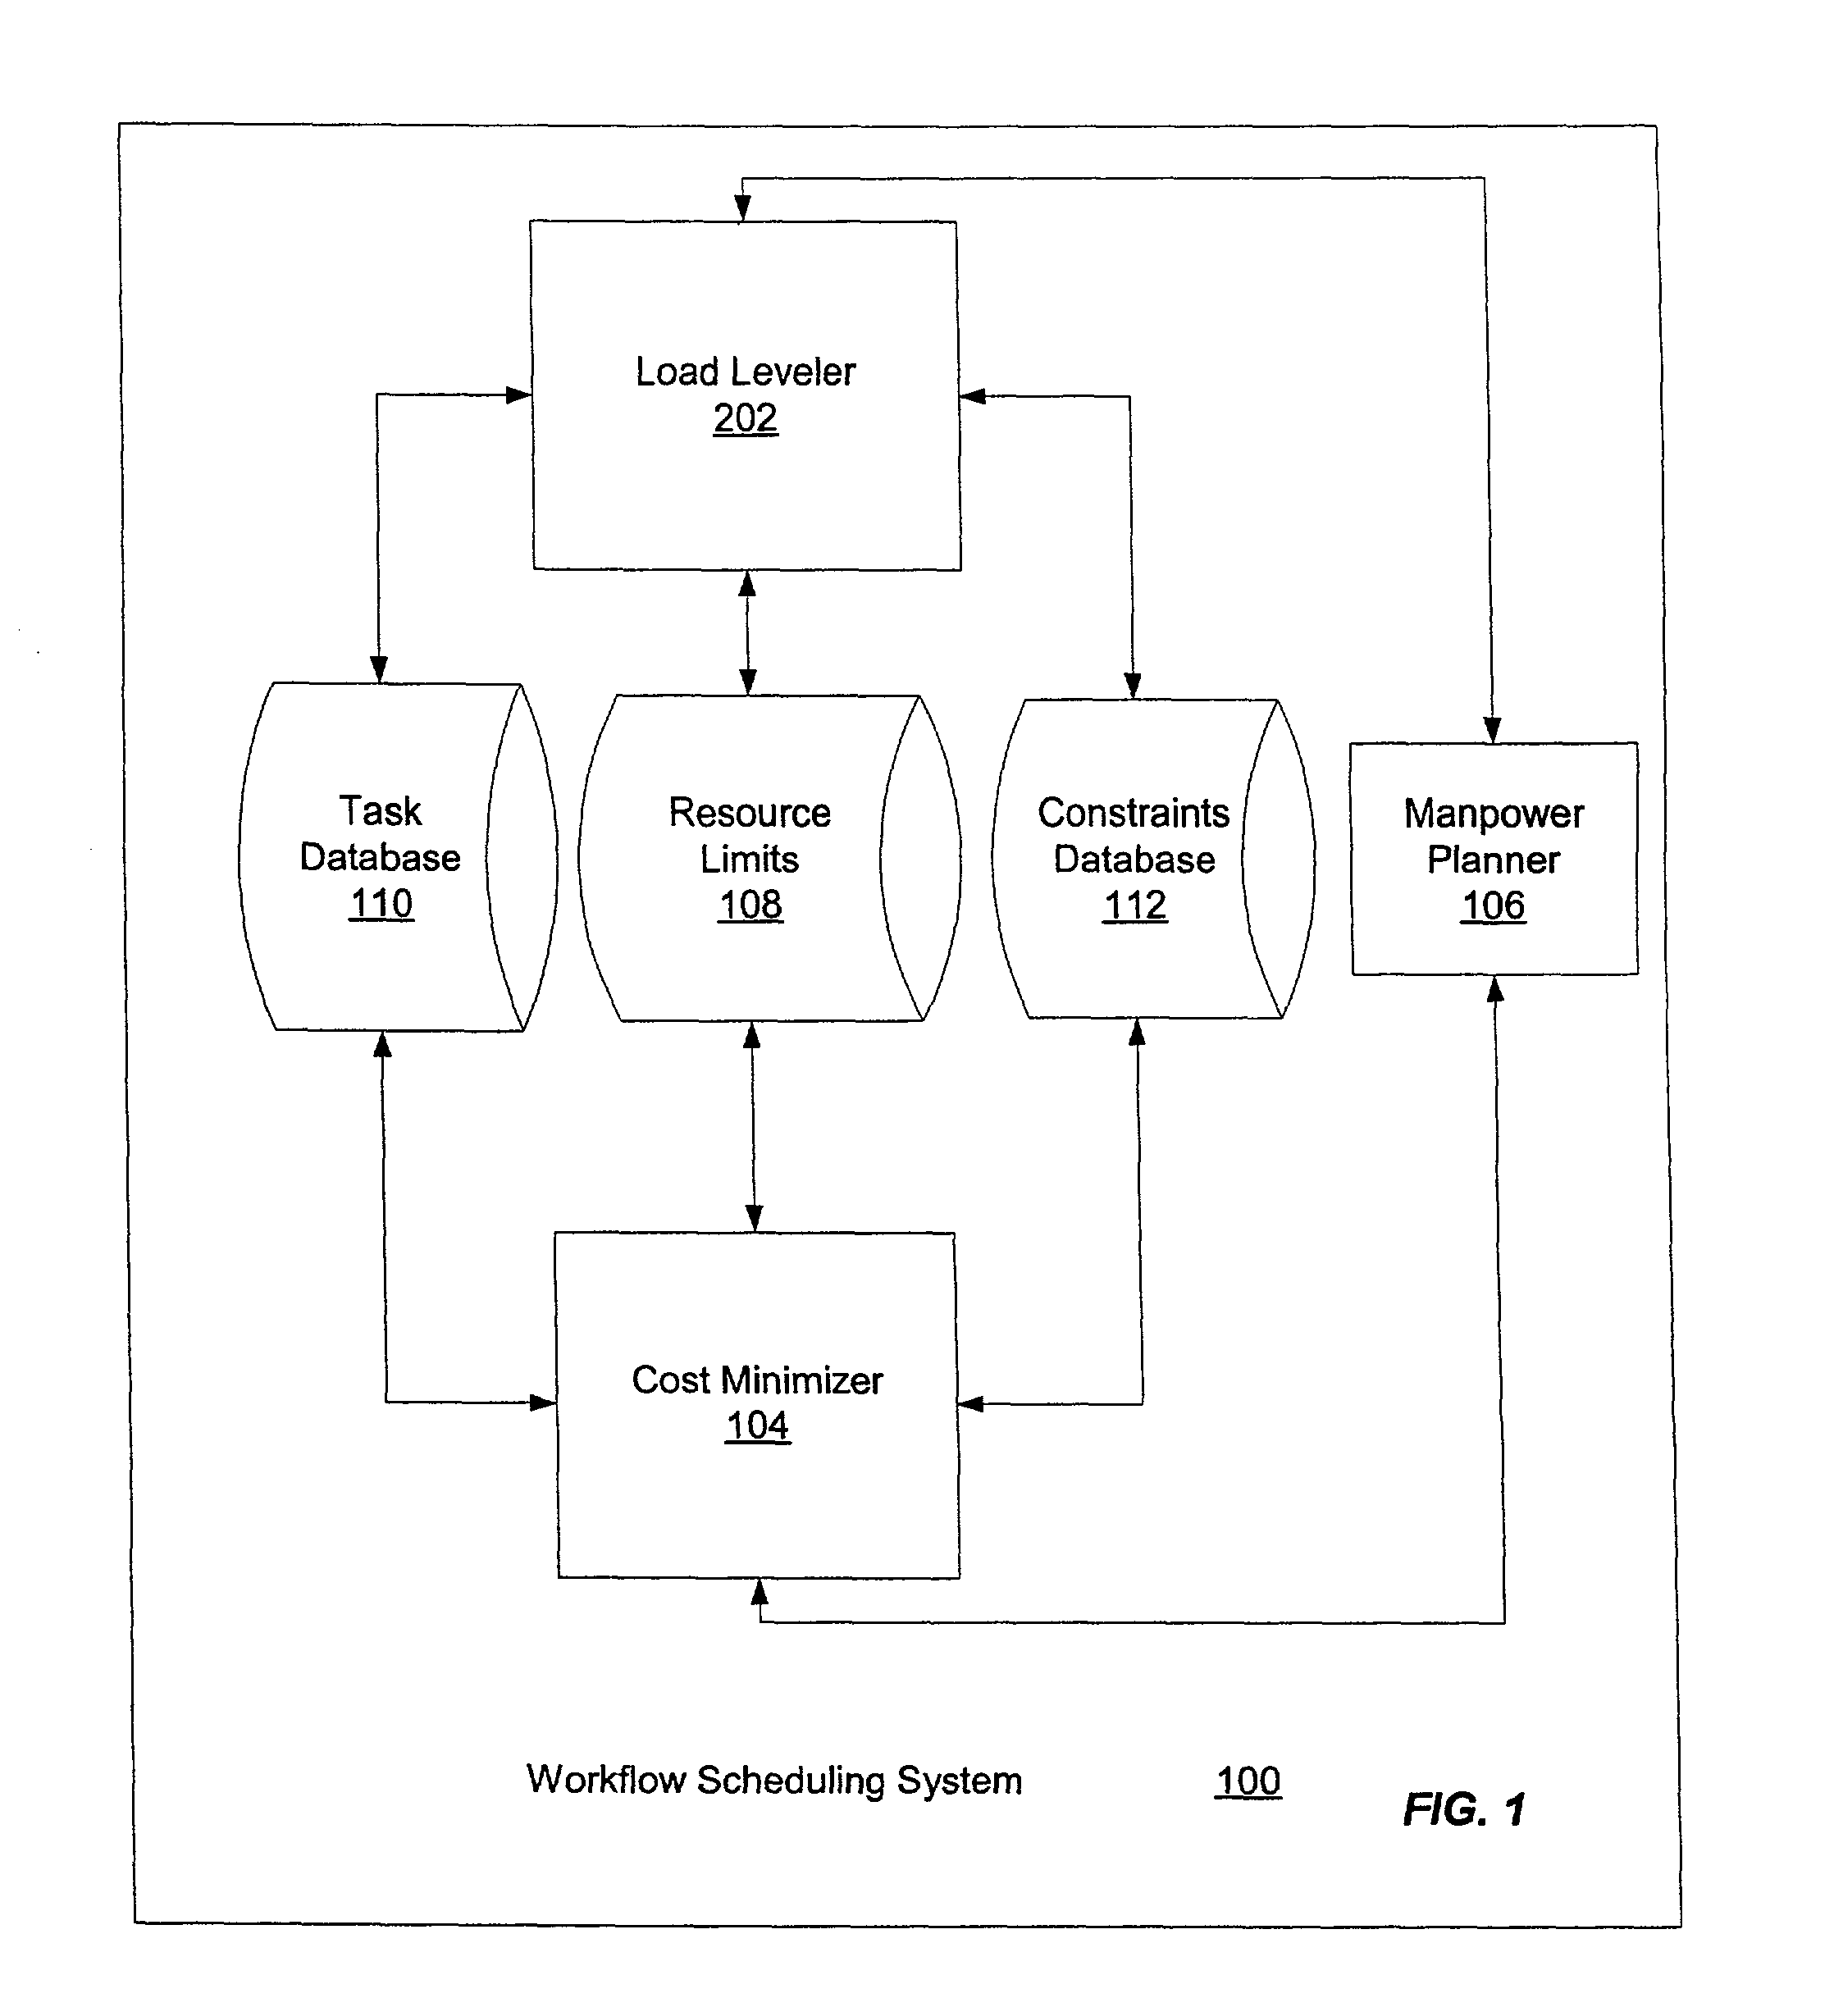 System and process for job scheduling to minimize construction costs